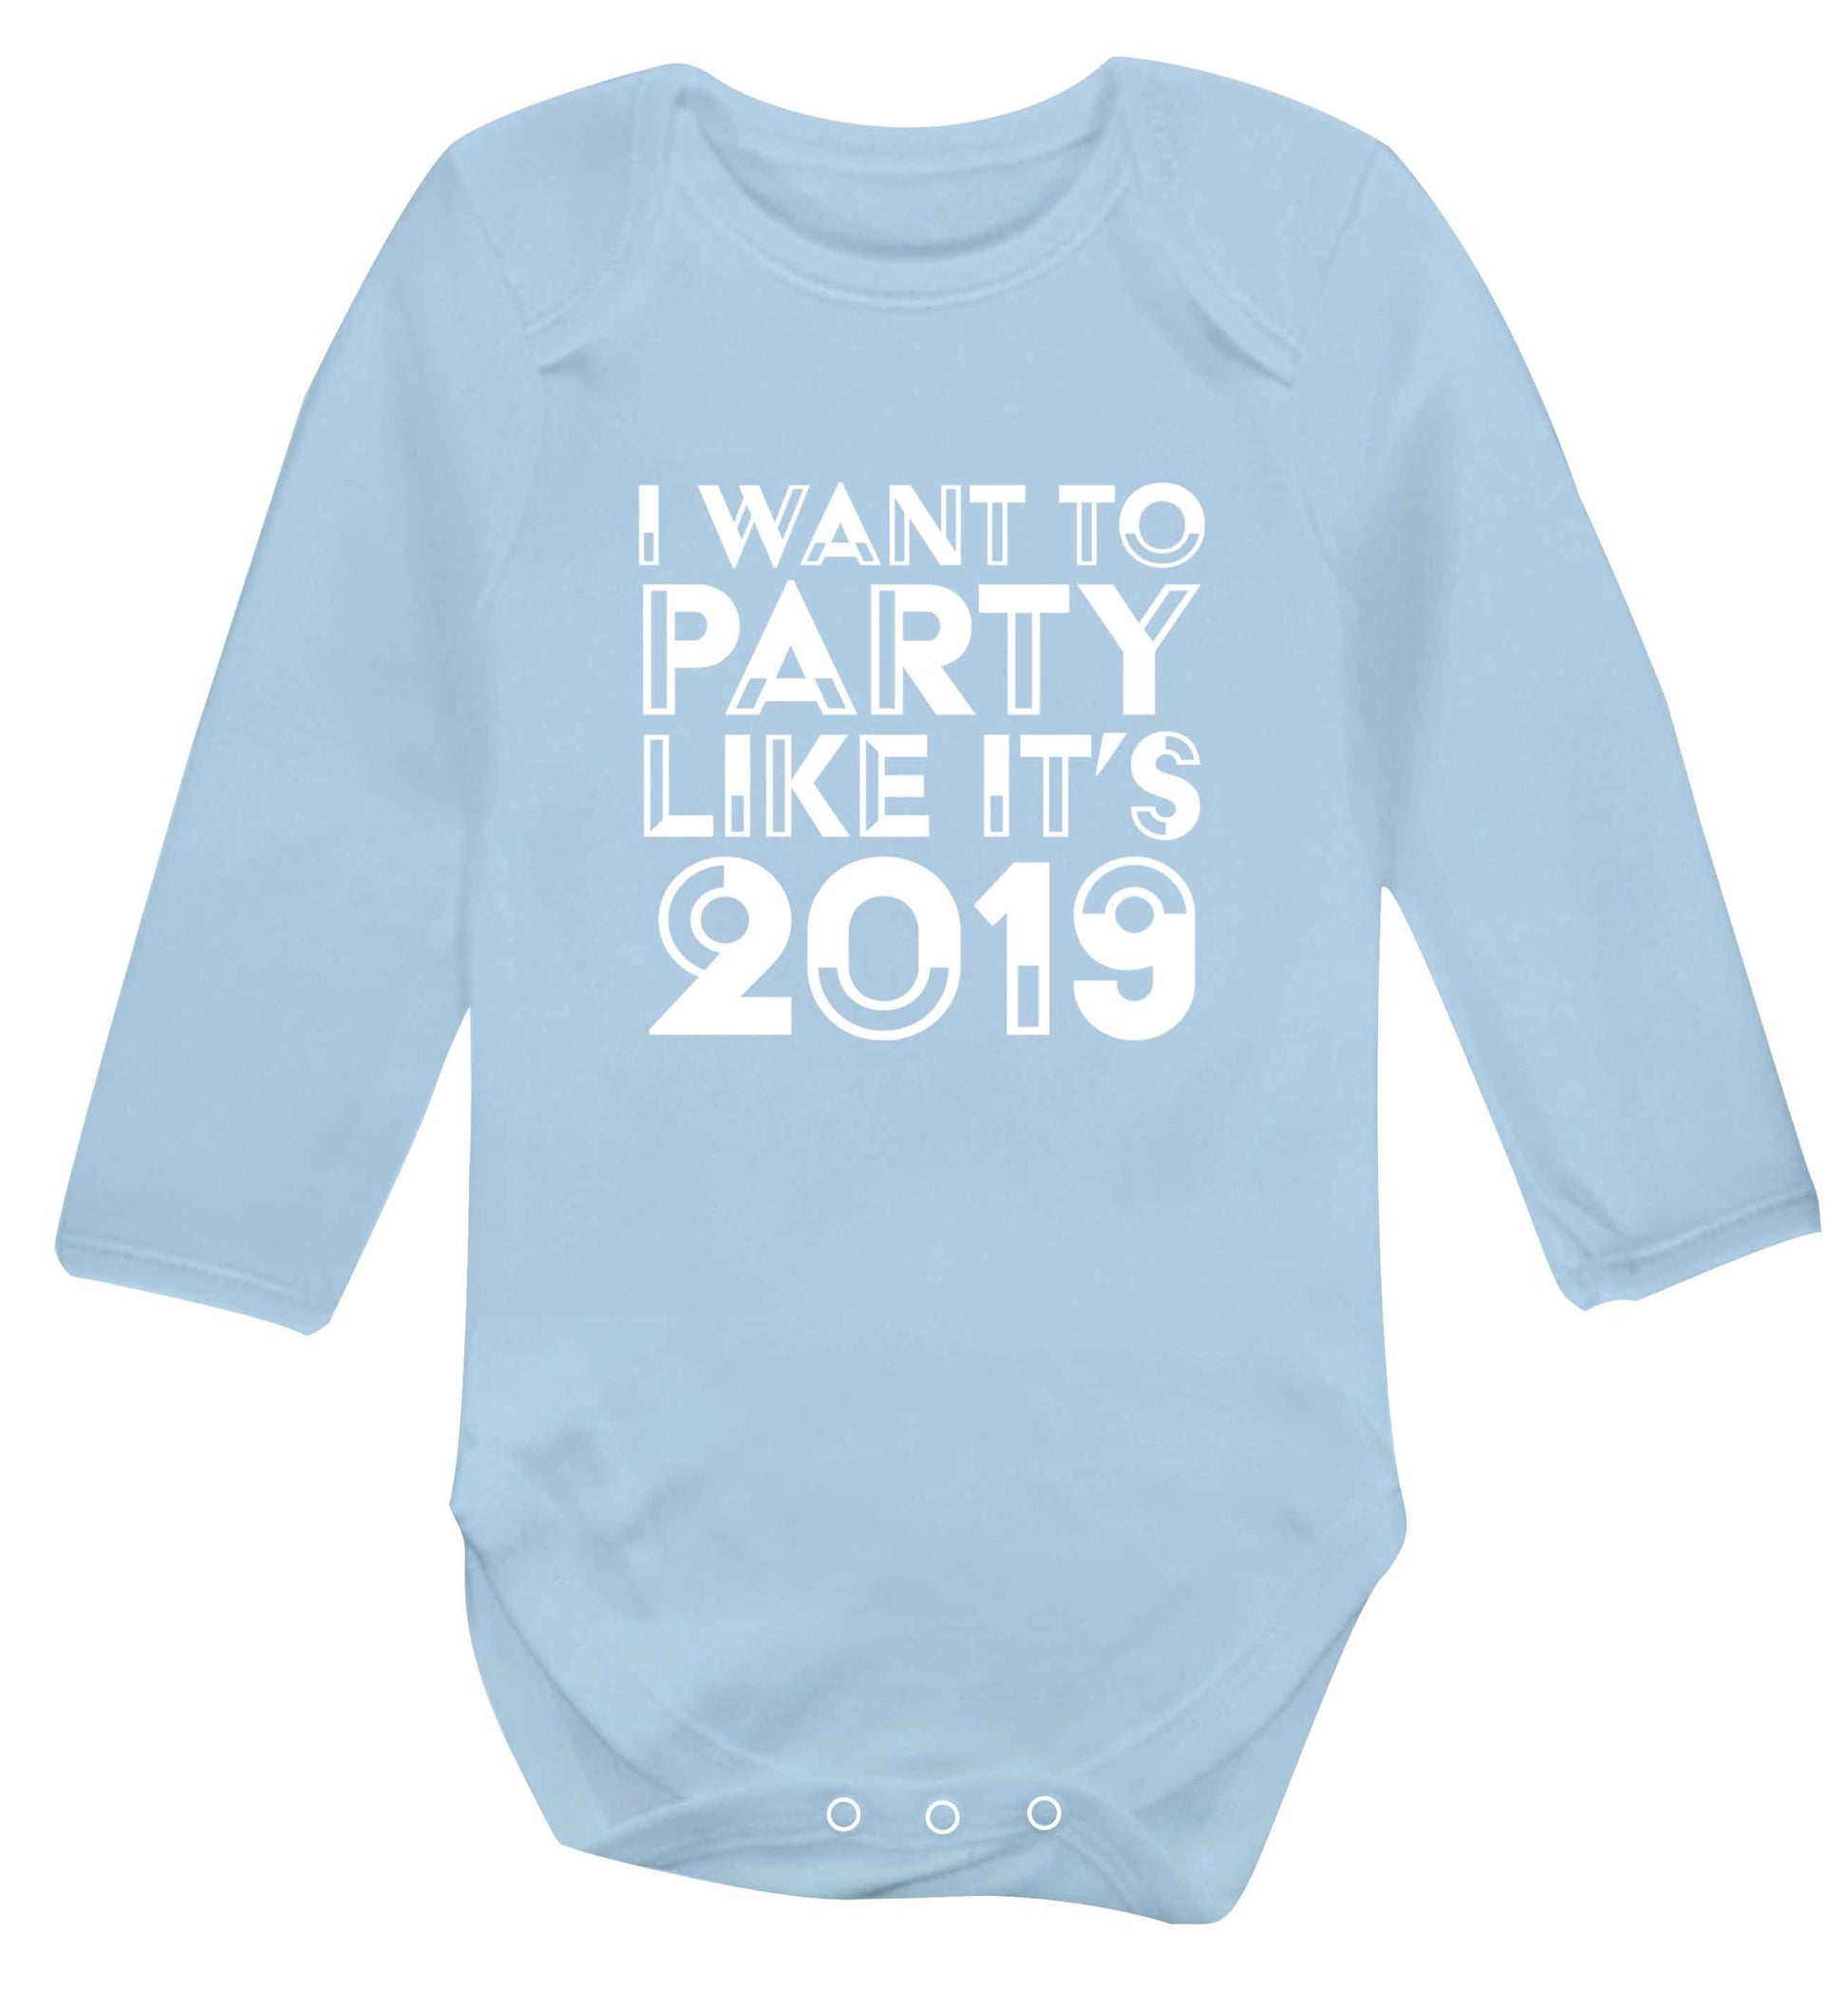 I want to party like it's 2019 baby vest long sleeved pale blue 6-12 months